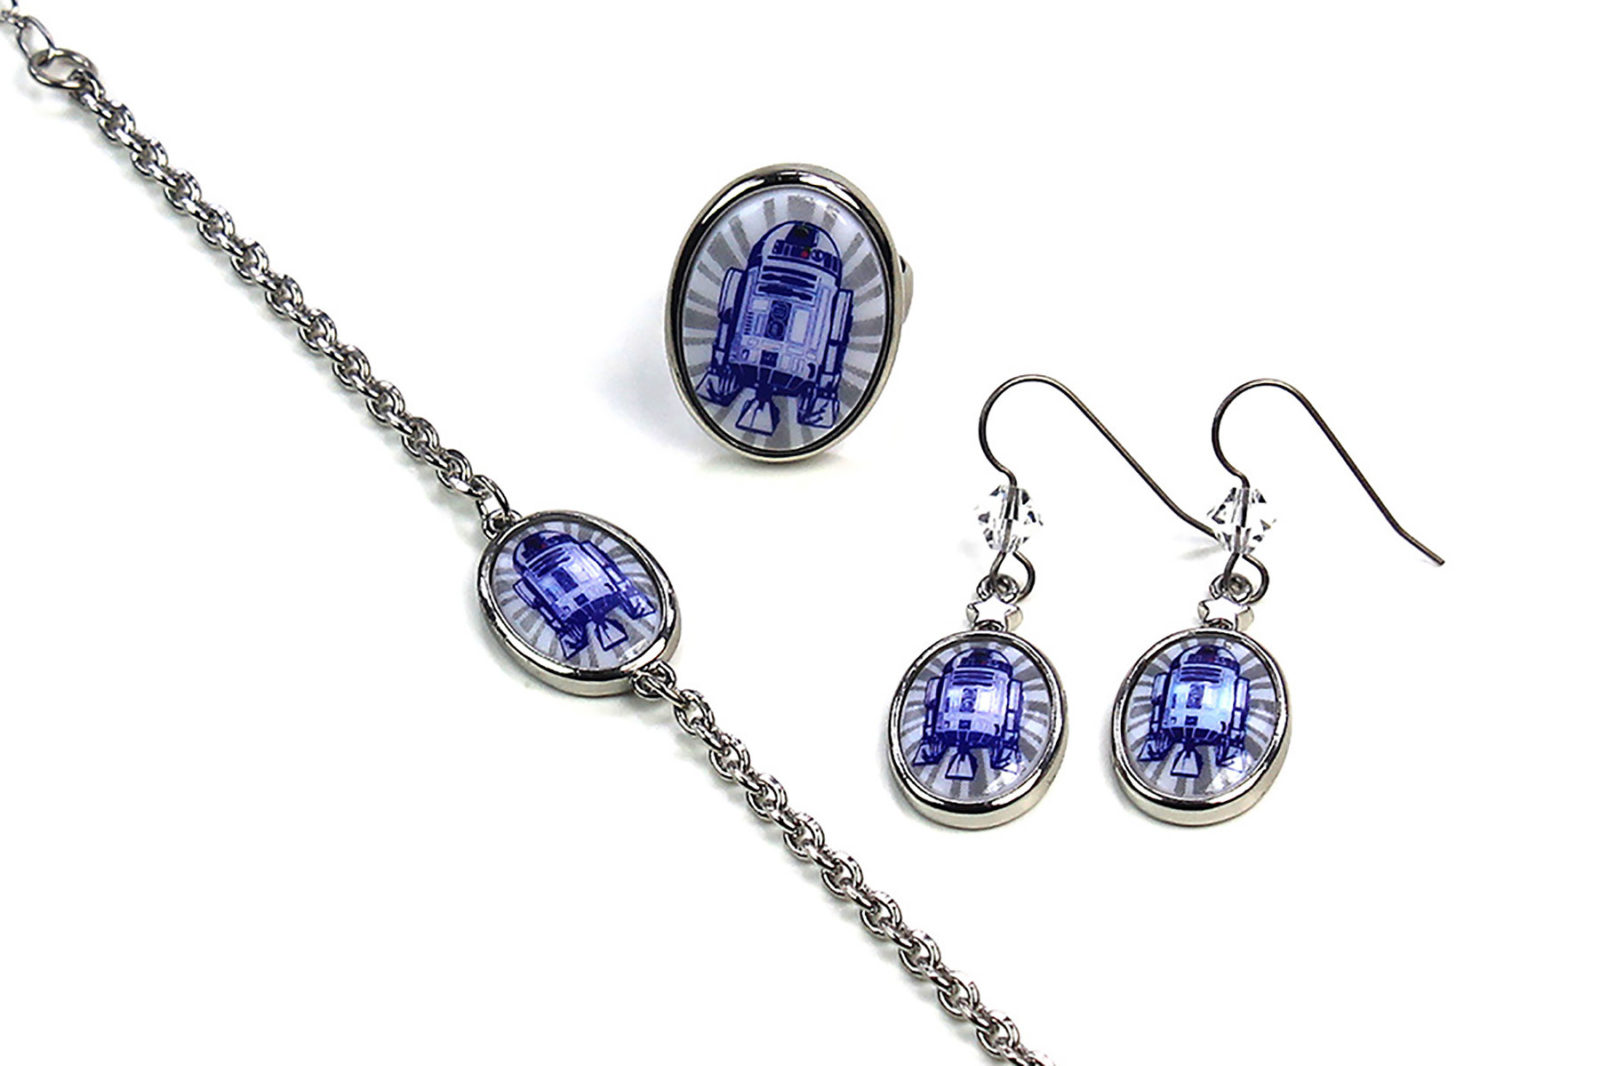 Review – R2-D2 jewelry